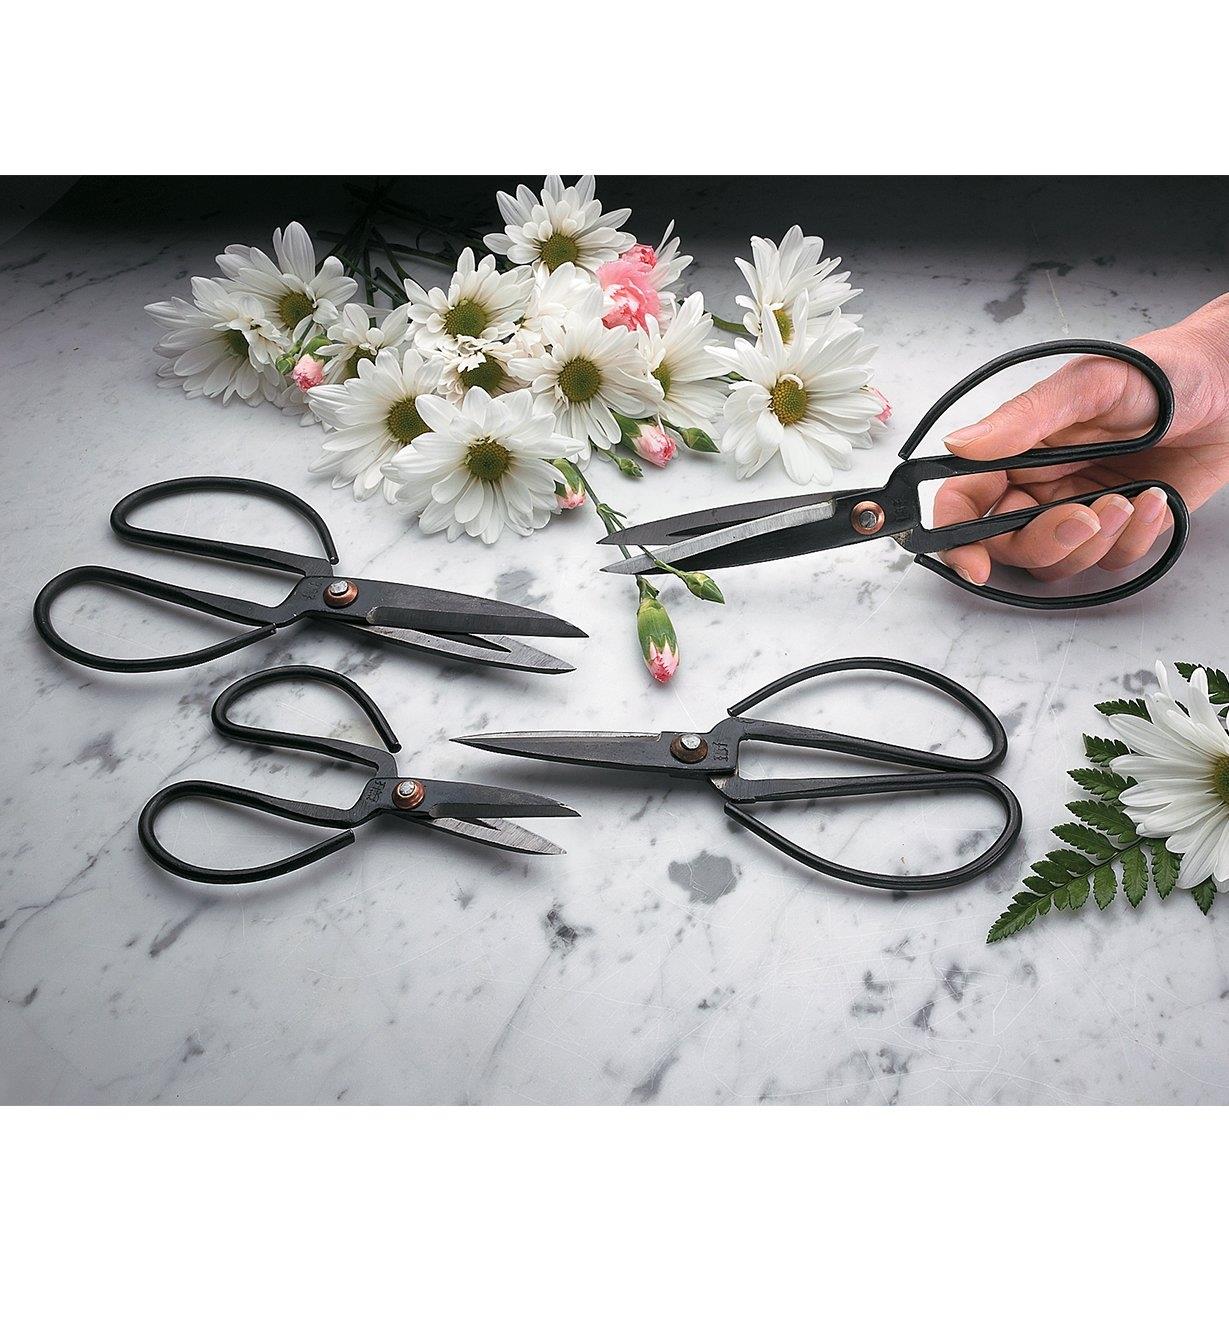 Using Chinese Scissors to cut flower stems